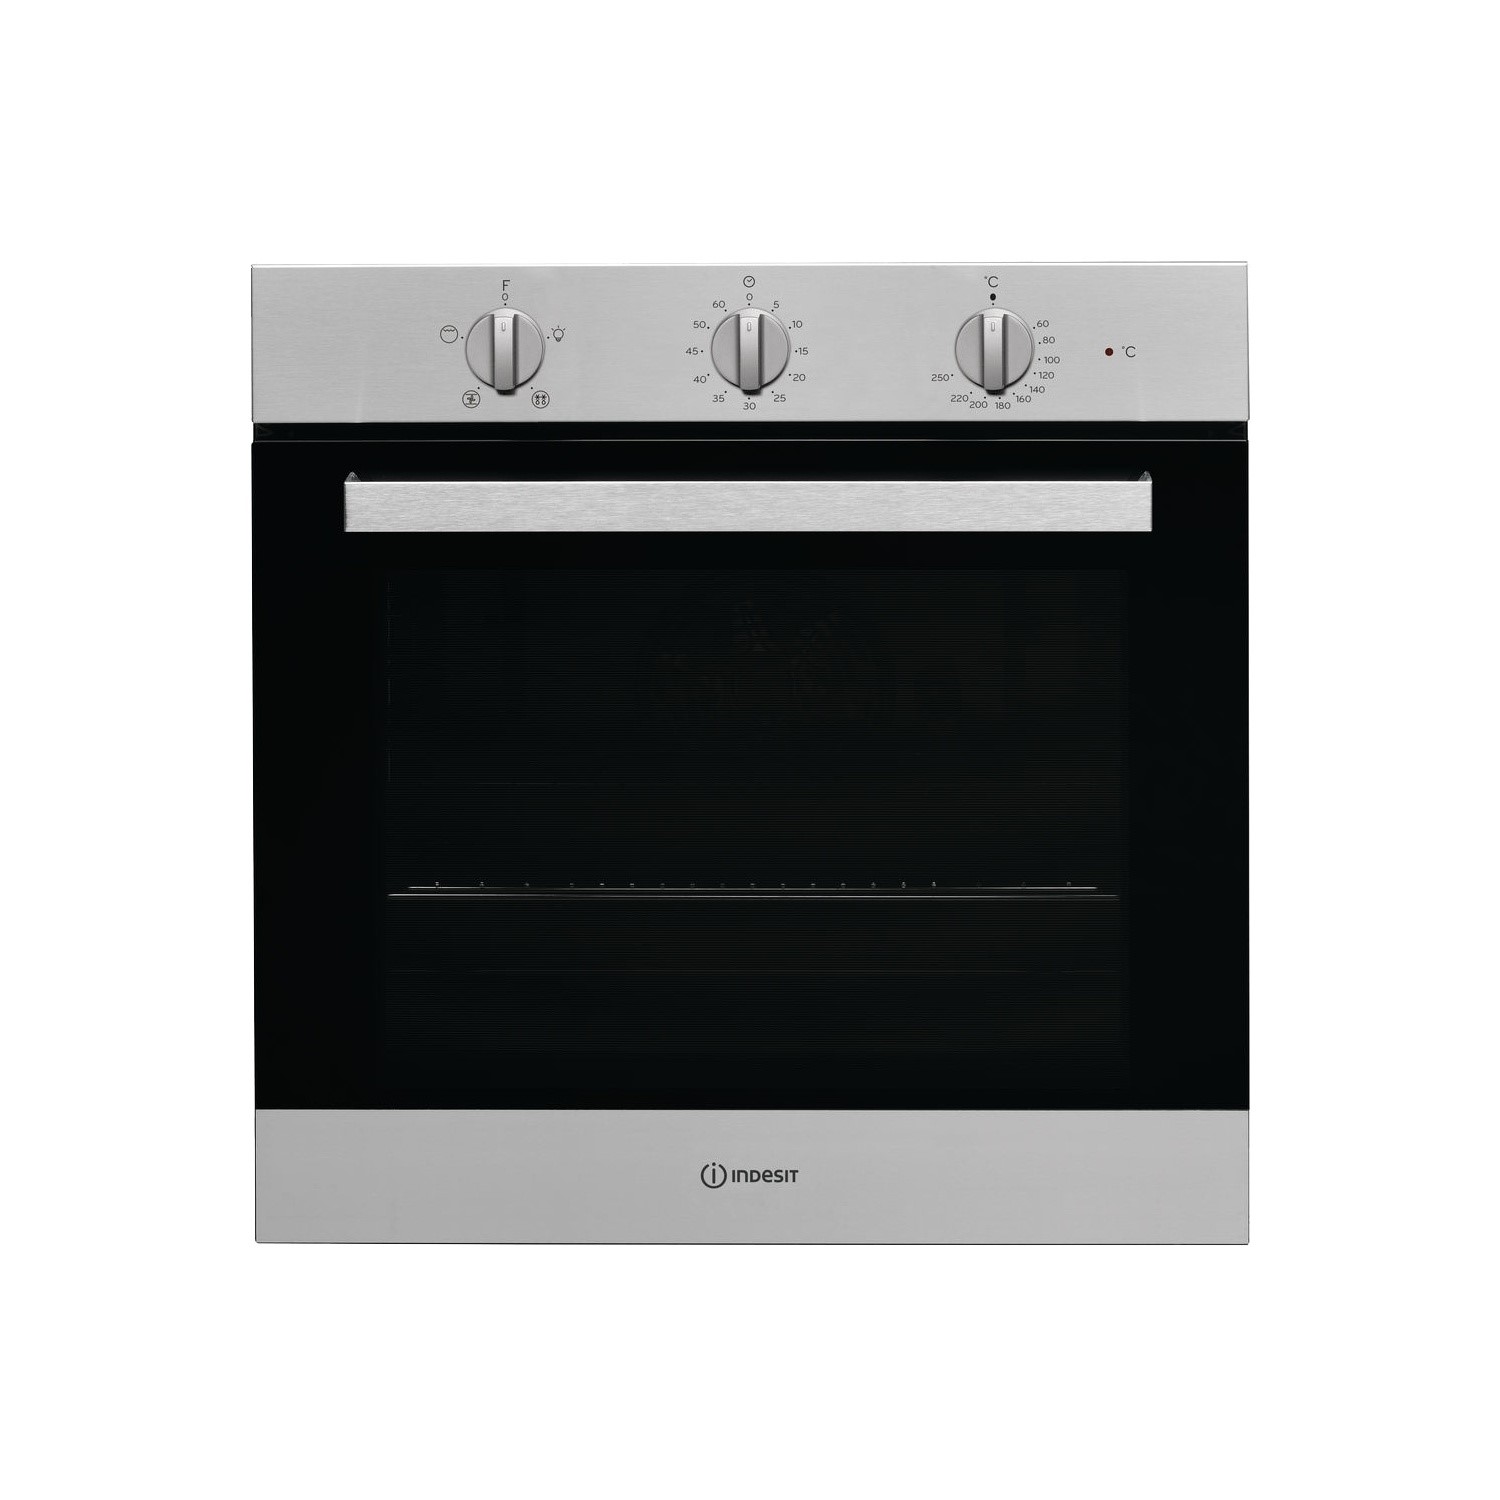 Indesit Aria IFW6330IX Built In Electric Single Oven - Stainless Steel - A Rated